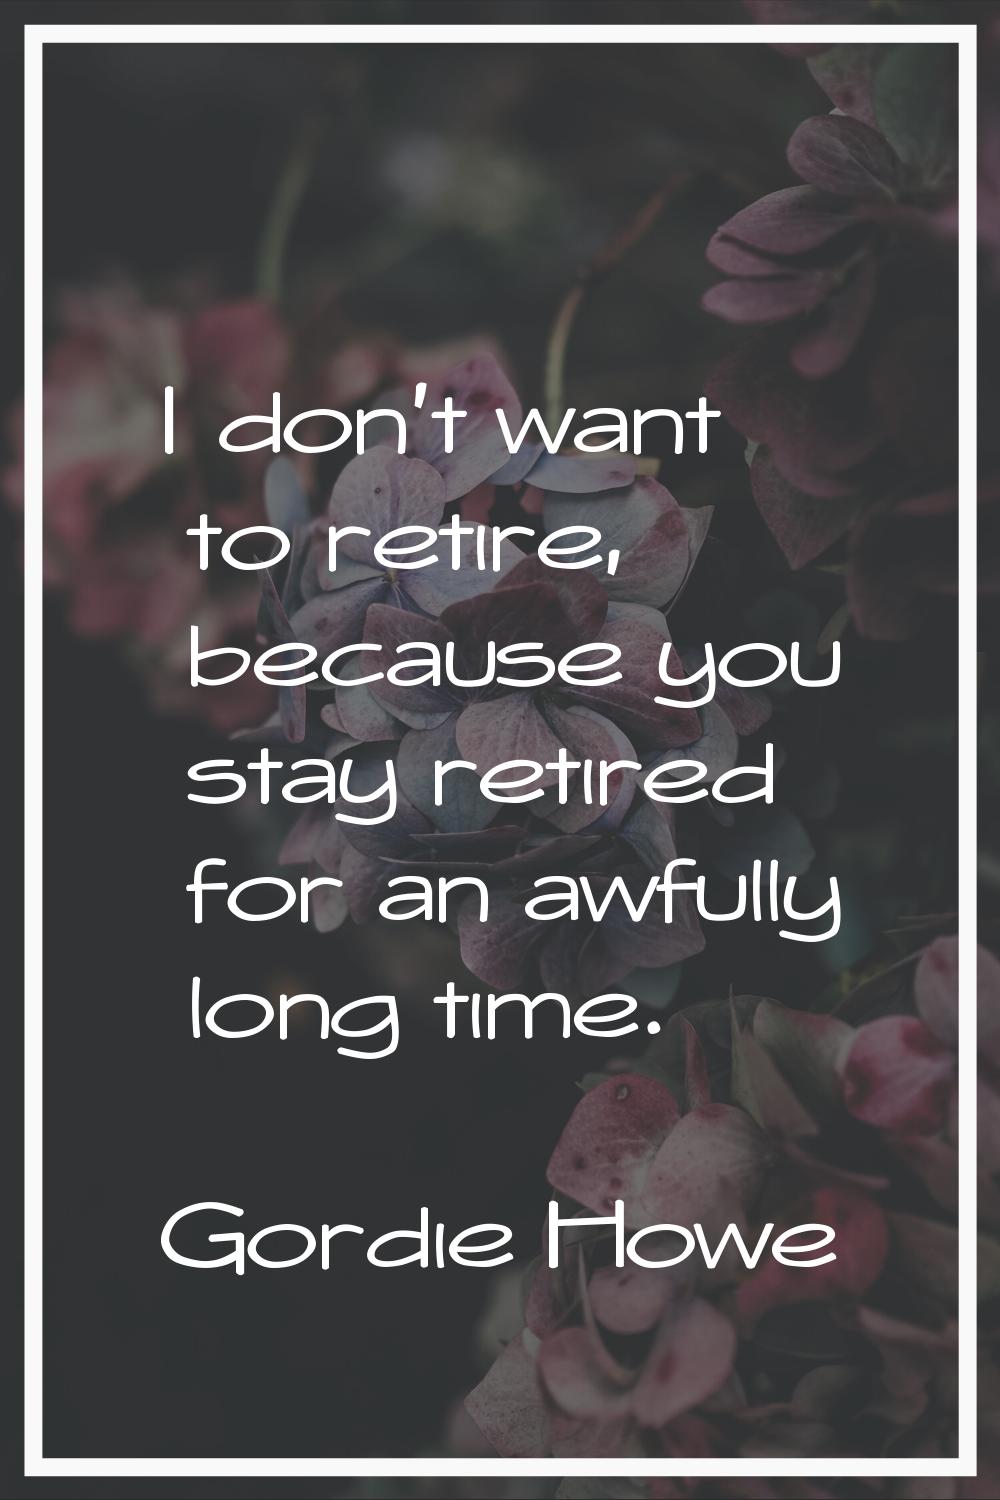 I don't want to retire, because you stay retired for an awfully long time.